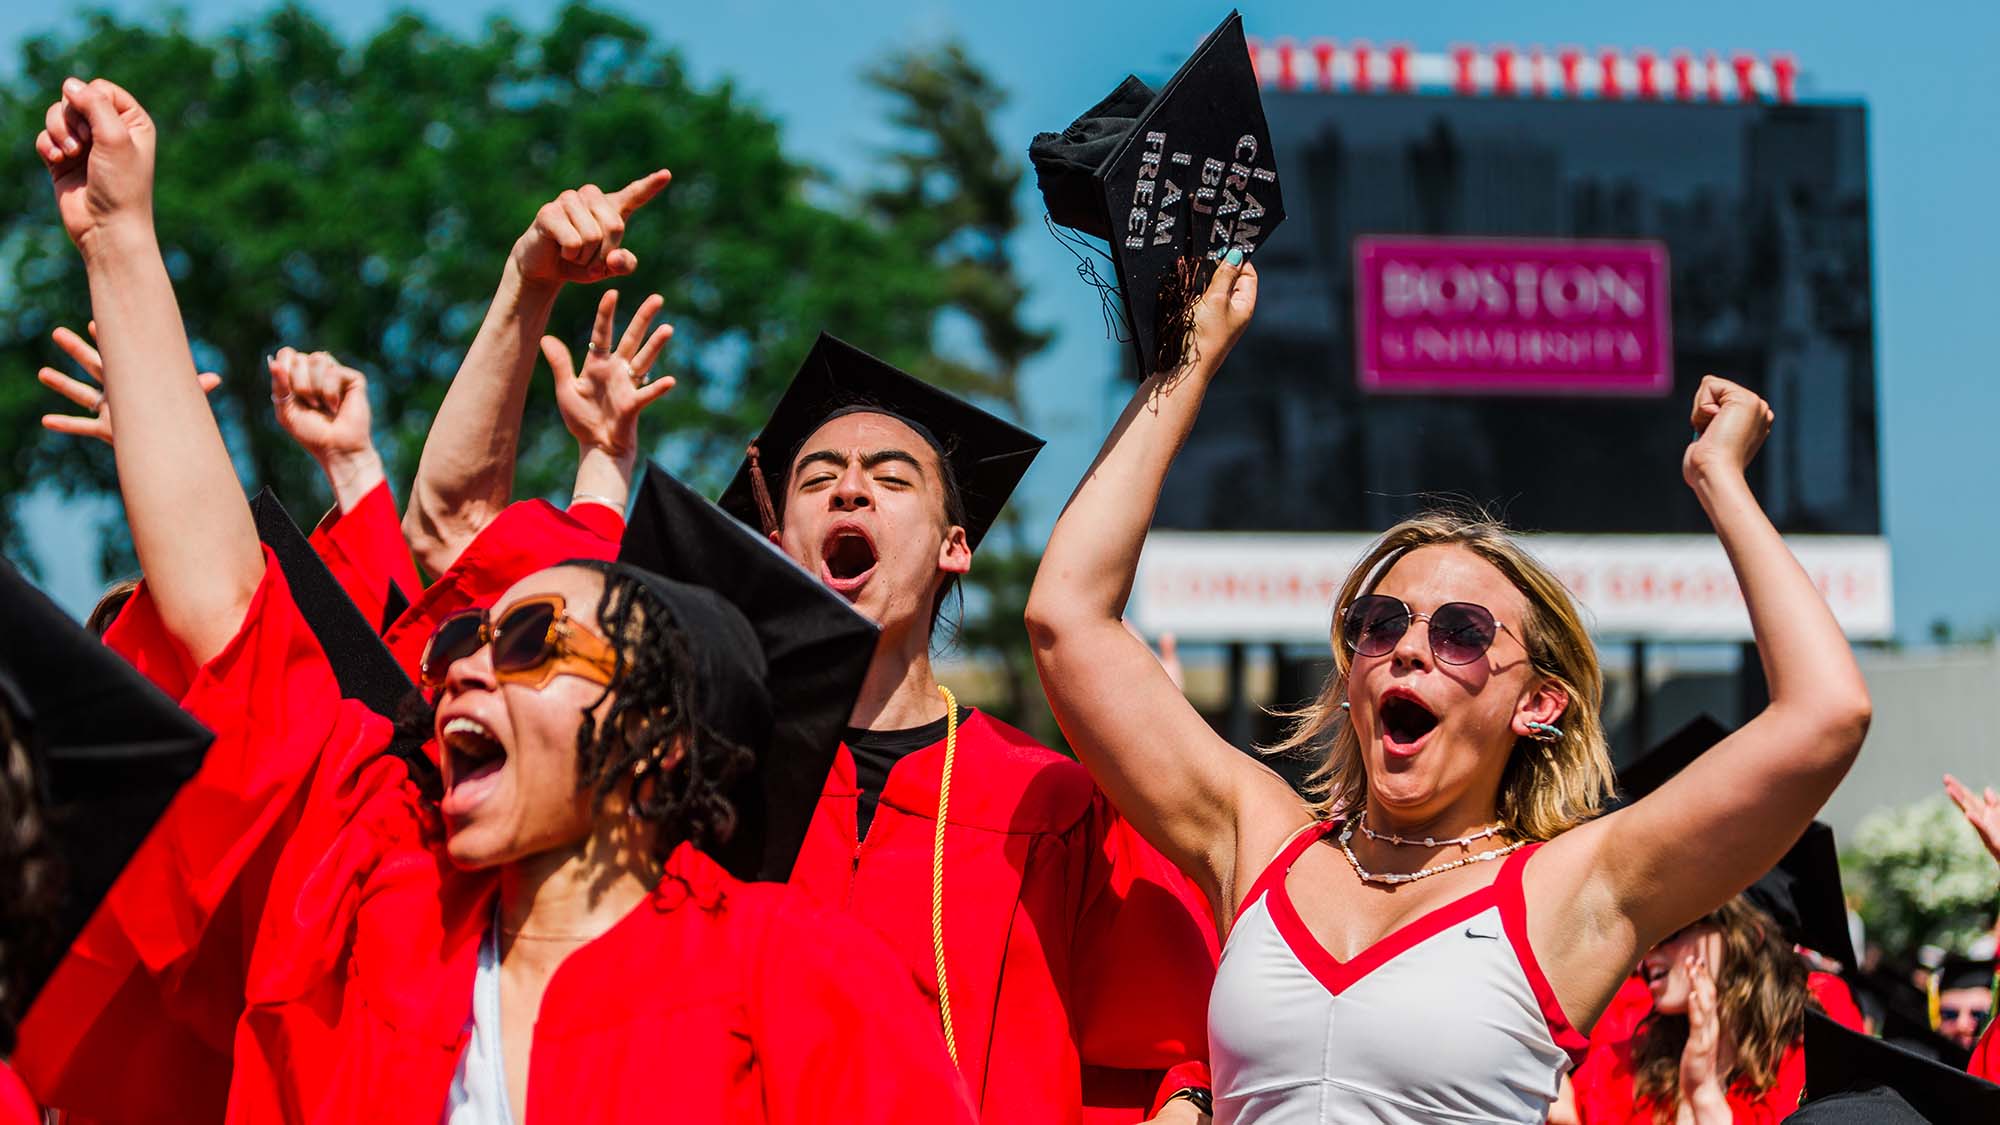 Photo of students on Nickerson field celebrating during the commencement ceremony. In the photo, a young Black woman with short locs, with sunglasses is seen cheering at left, a tall light-skinned boy raises his hand in the air and yells, a White woman with short blonde hair and sunglasses wears a white nike tank top and raises both arms in the air. The jumbotron is seen blurred in the background.